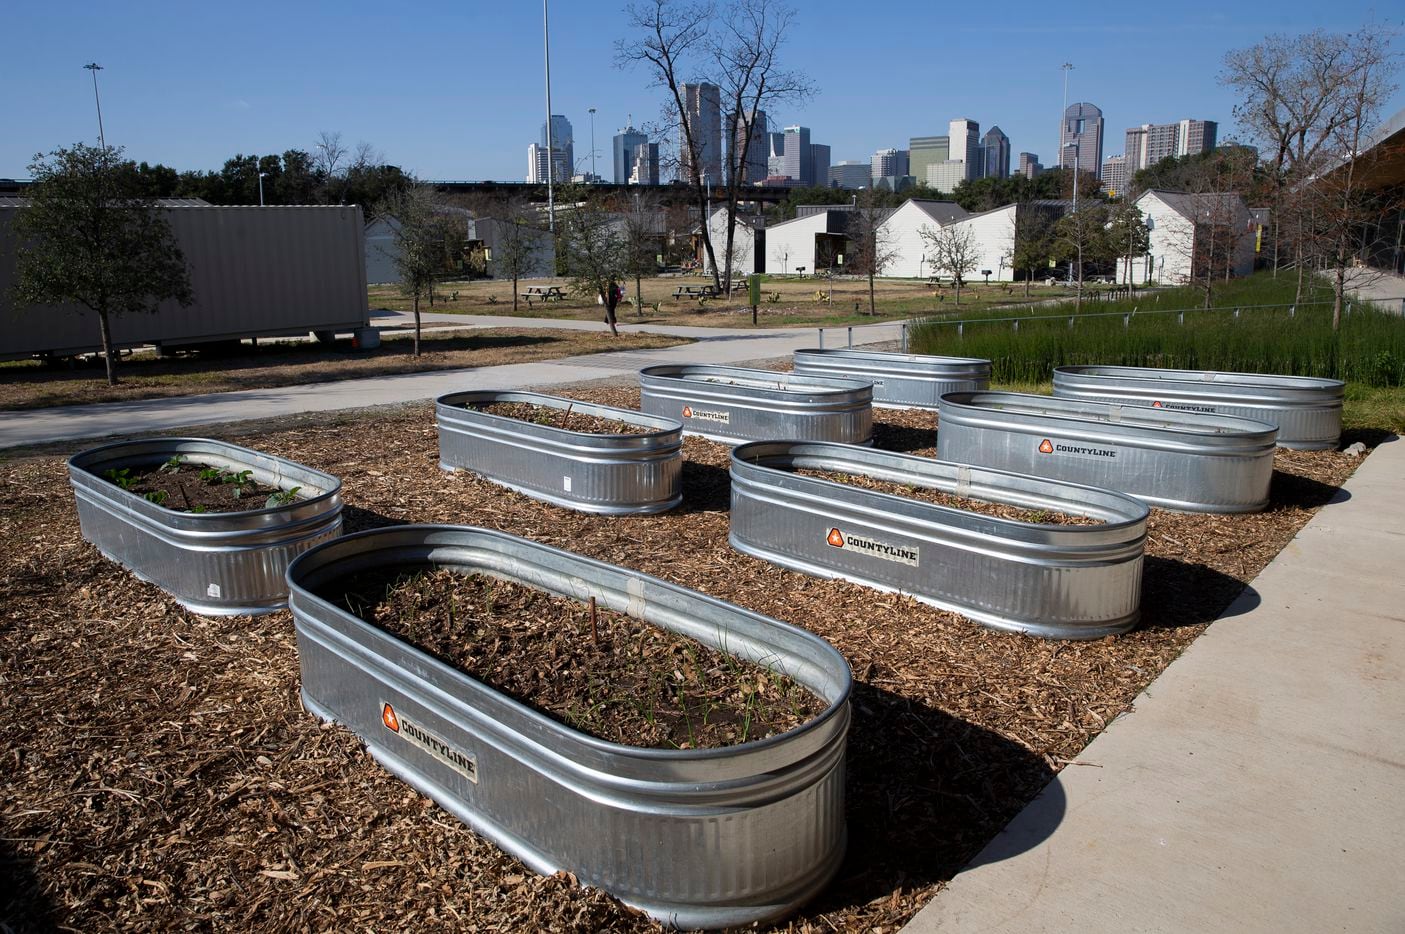 The community garden at the Cottages of Hickory Crossing, which is located at 1621 S Malcolm X Blvd, on Dec. 6, 2019 in Dallas. Hickory Cottages, a project administered by nonprofit CitySquare, is a community of 50 micro-houses designed to provide housing for homeless individuals. (Juan Figueroa/ The Dallas Morning News)